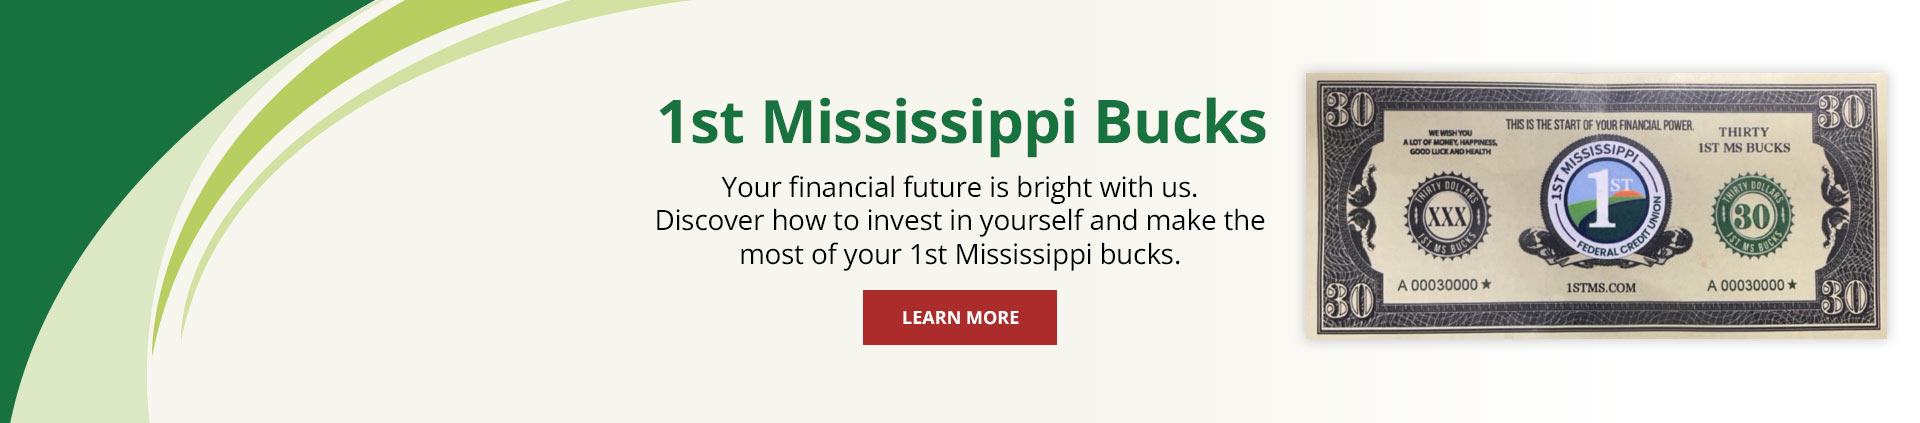 1st Mississippi Bucks
Your financial future is bright with us. Discover how to invest in yourself and make the most of your 1st Mississippi bucks.
Learn More